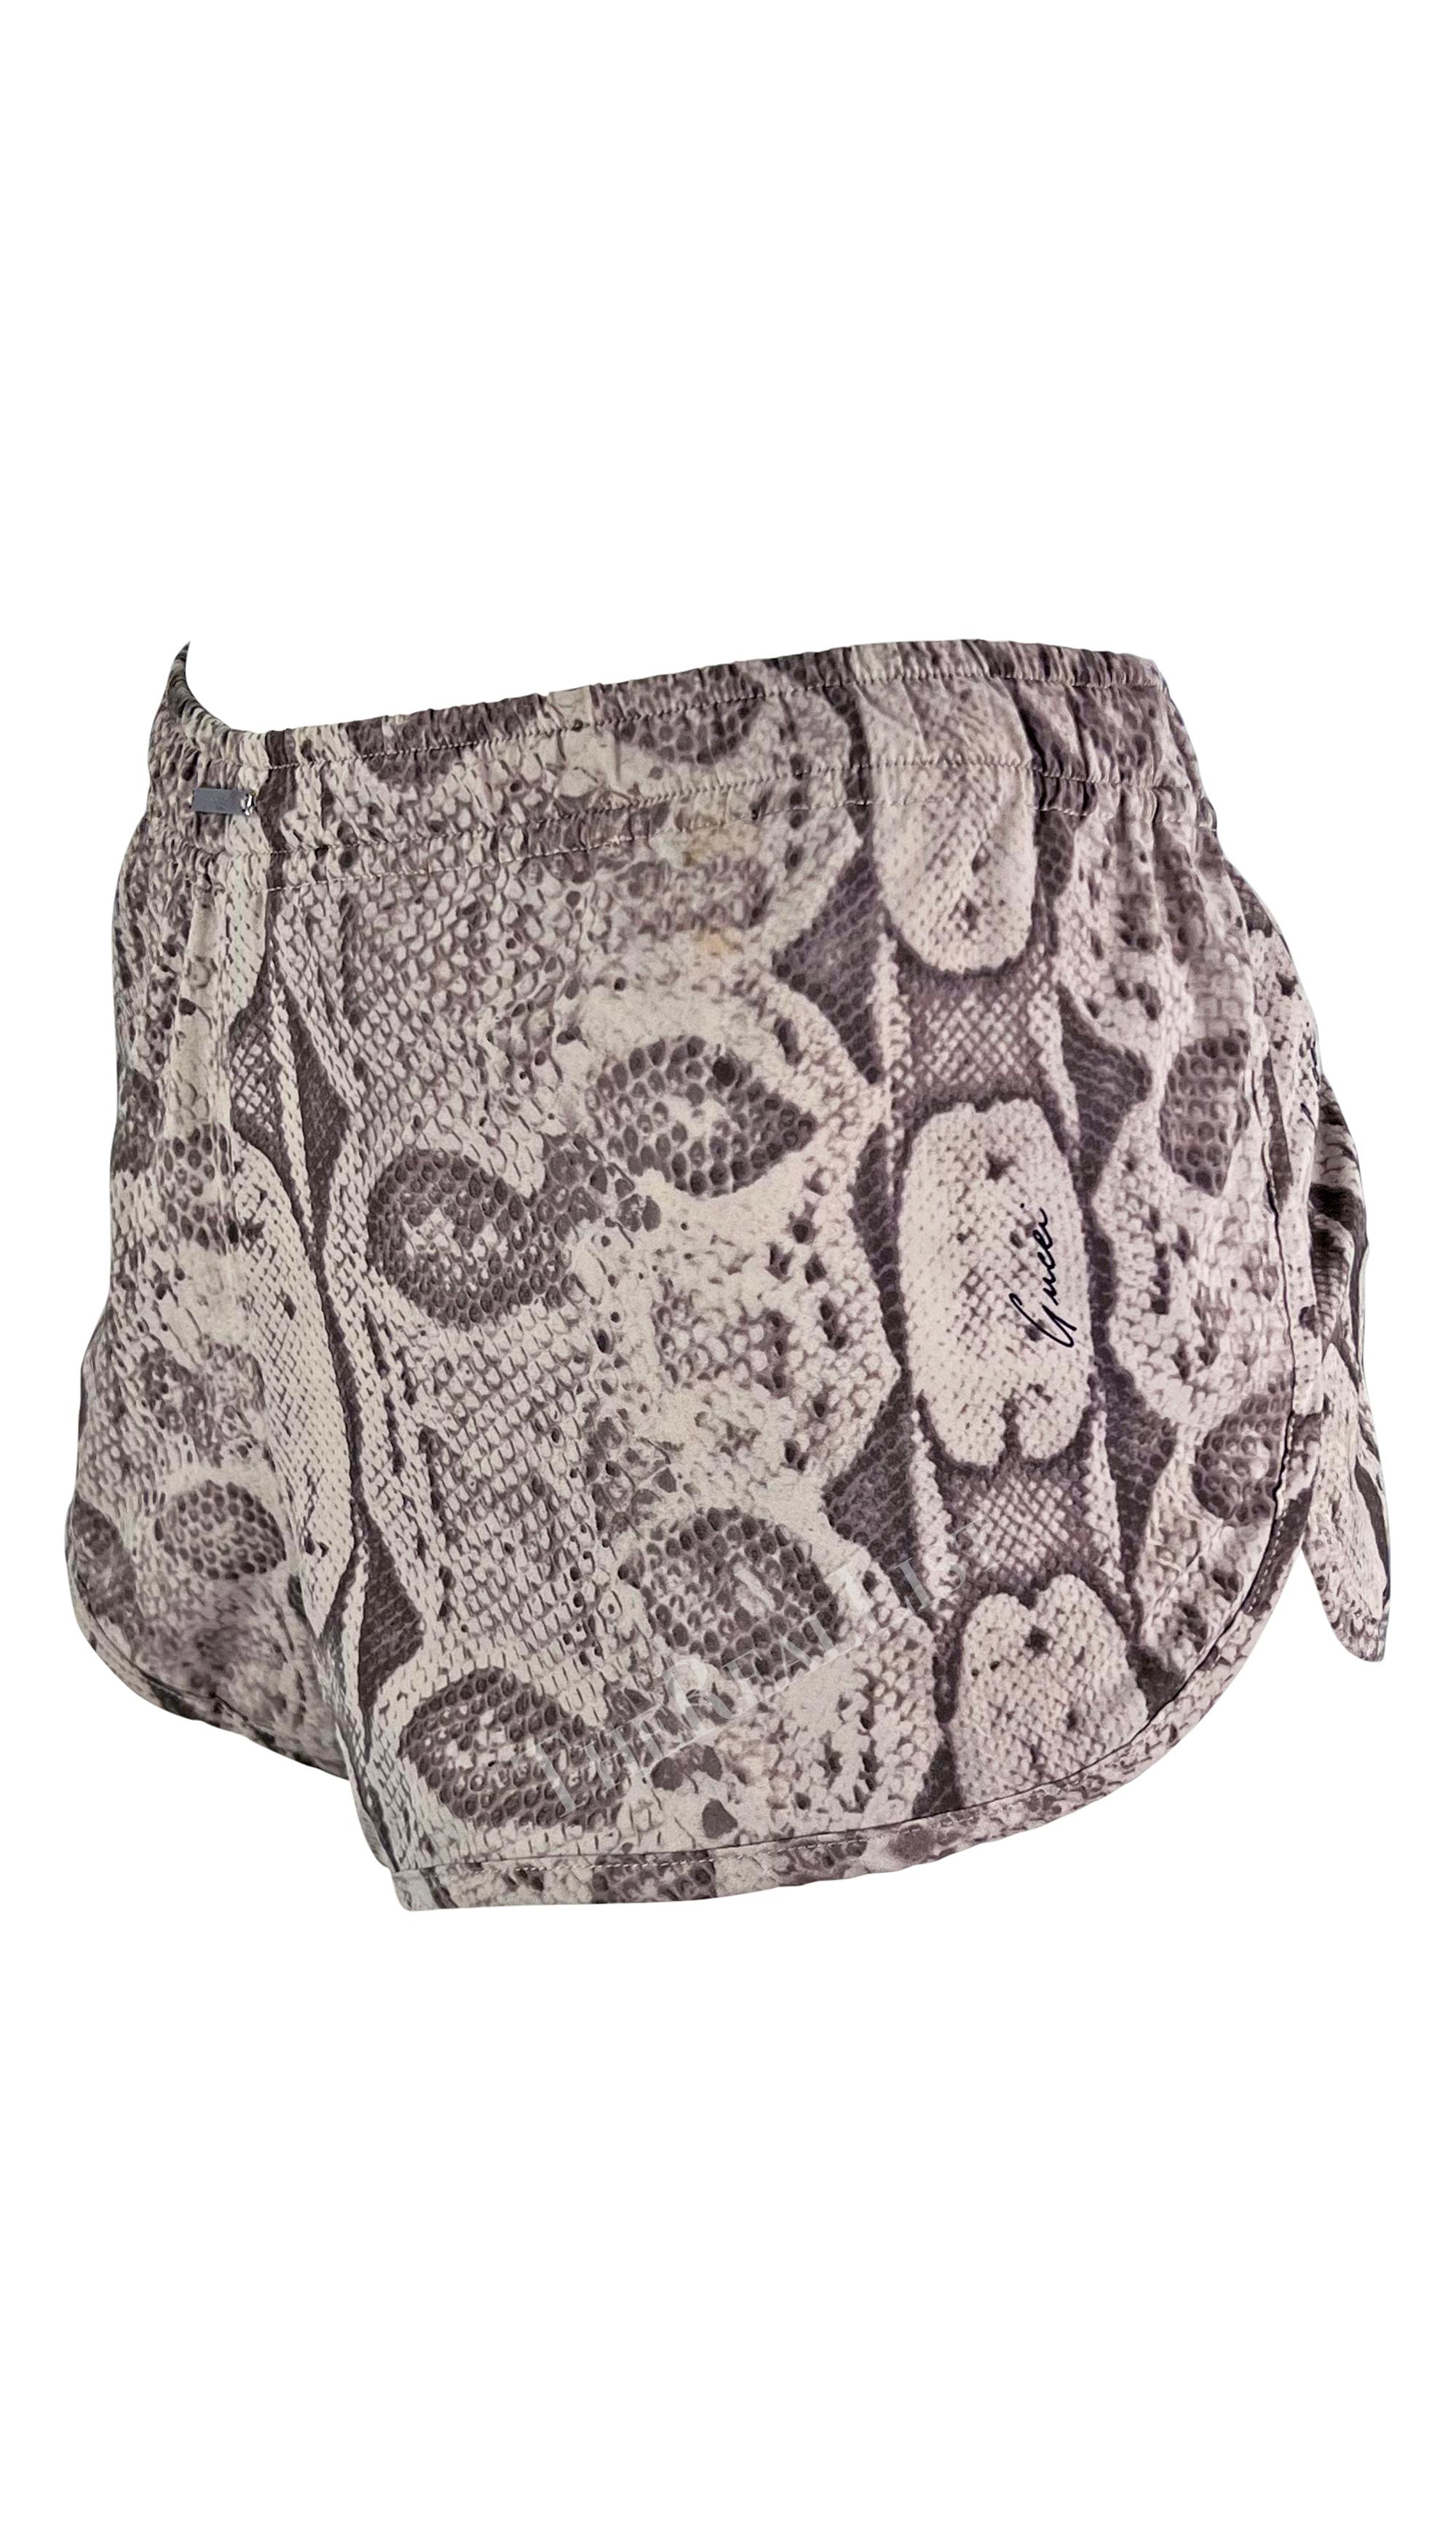 S/S 2000 Gucci by Tom Ford Runway Snake Skin Print Mini Shorts For Sale 2